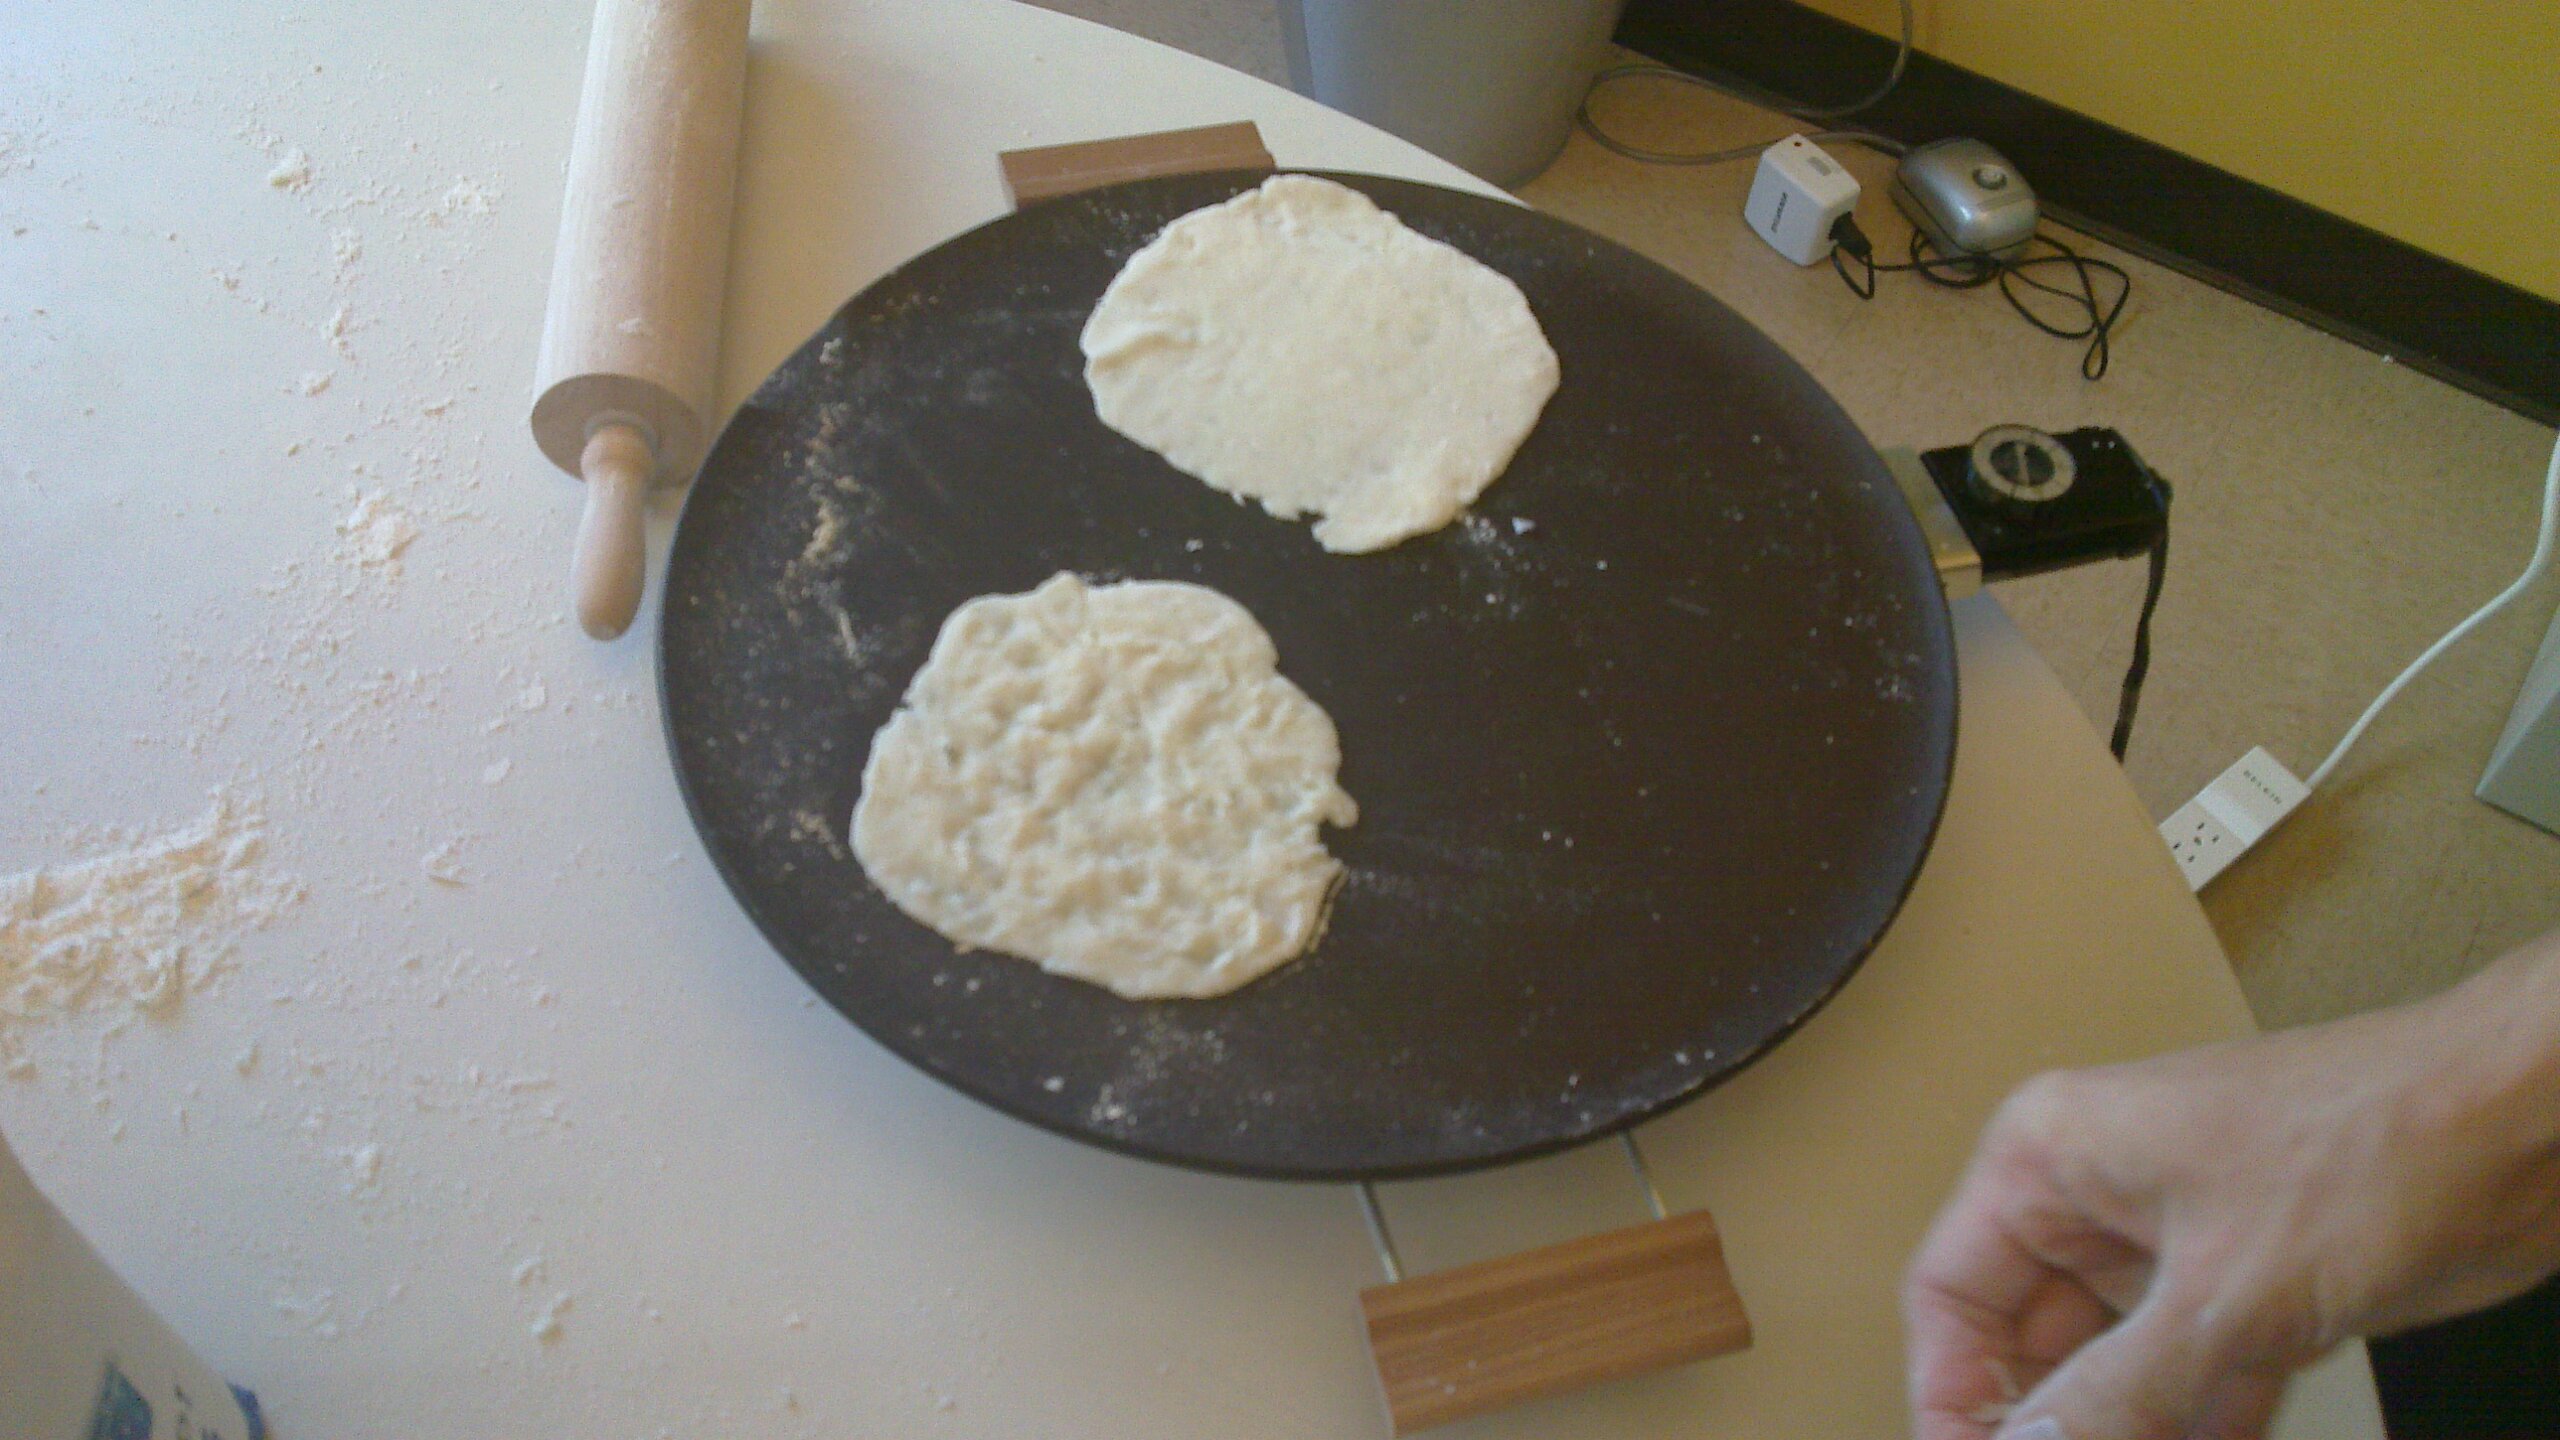 File:Two lefse cooking on a Heritage grill.jpg - Wikimedia Commons